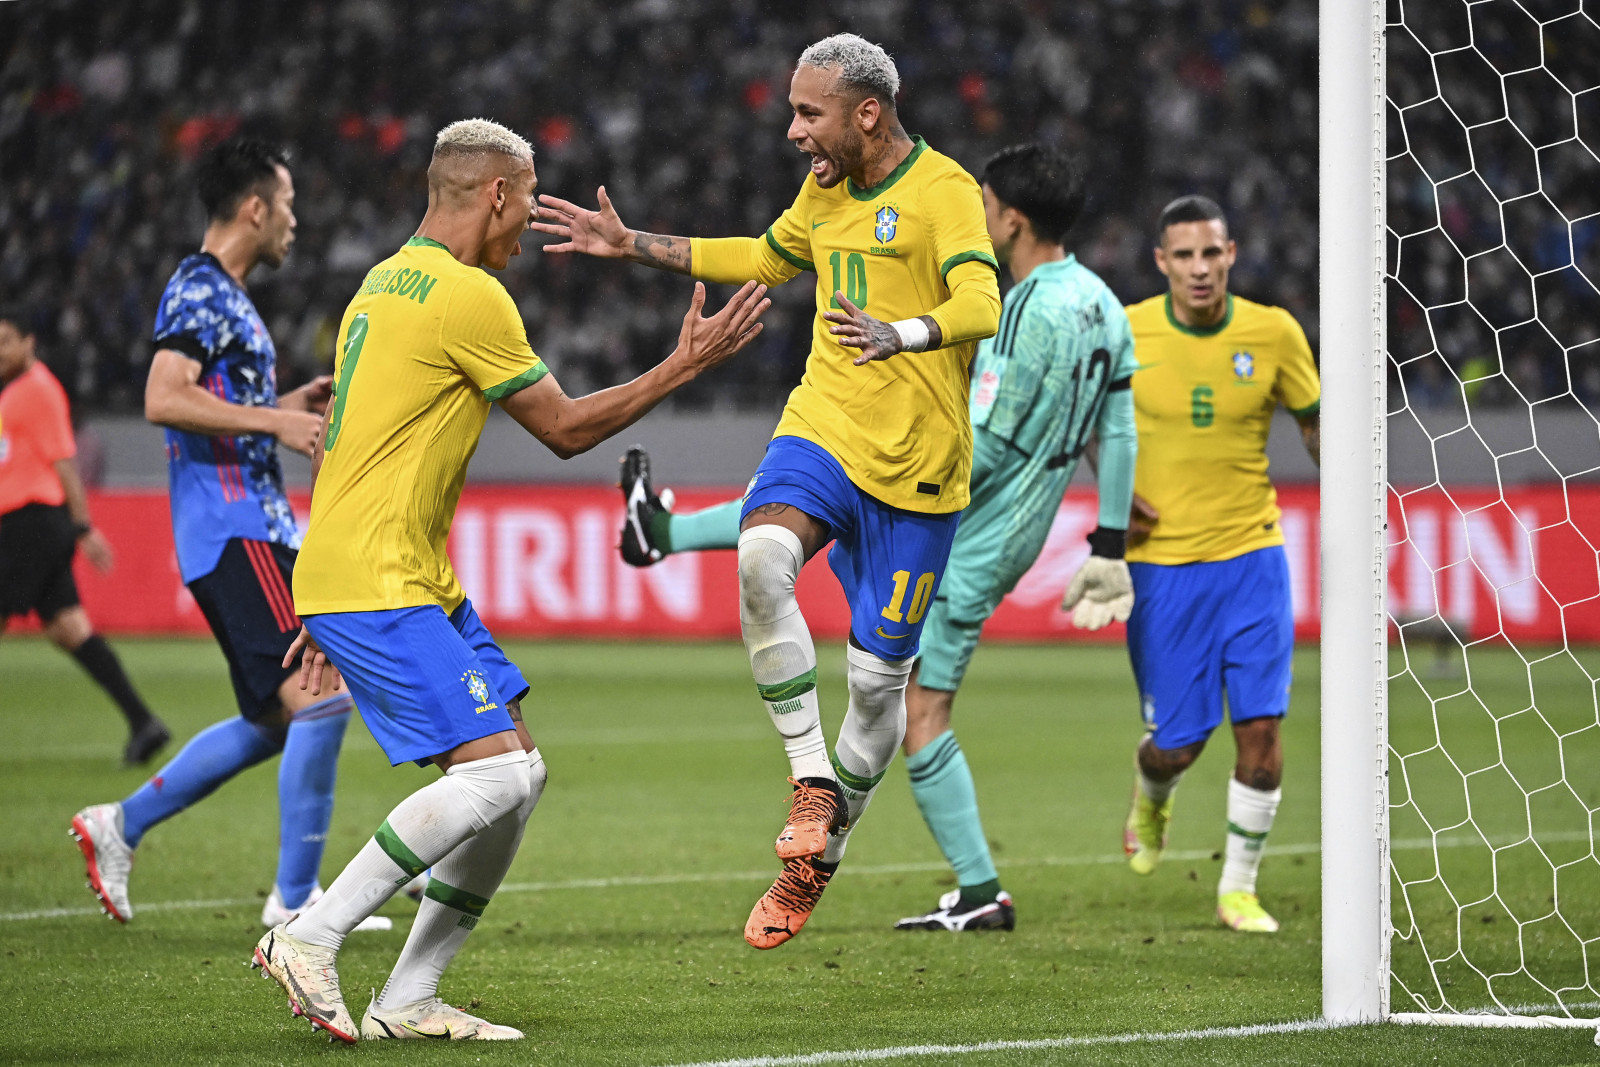 2022 World Cup: What's the deal in group G? – The Mail & Guardian